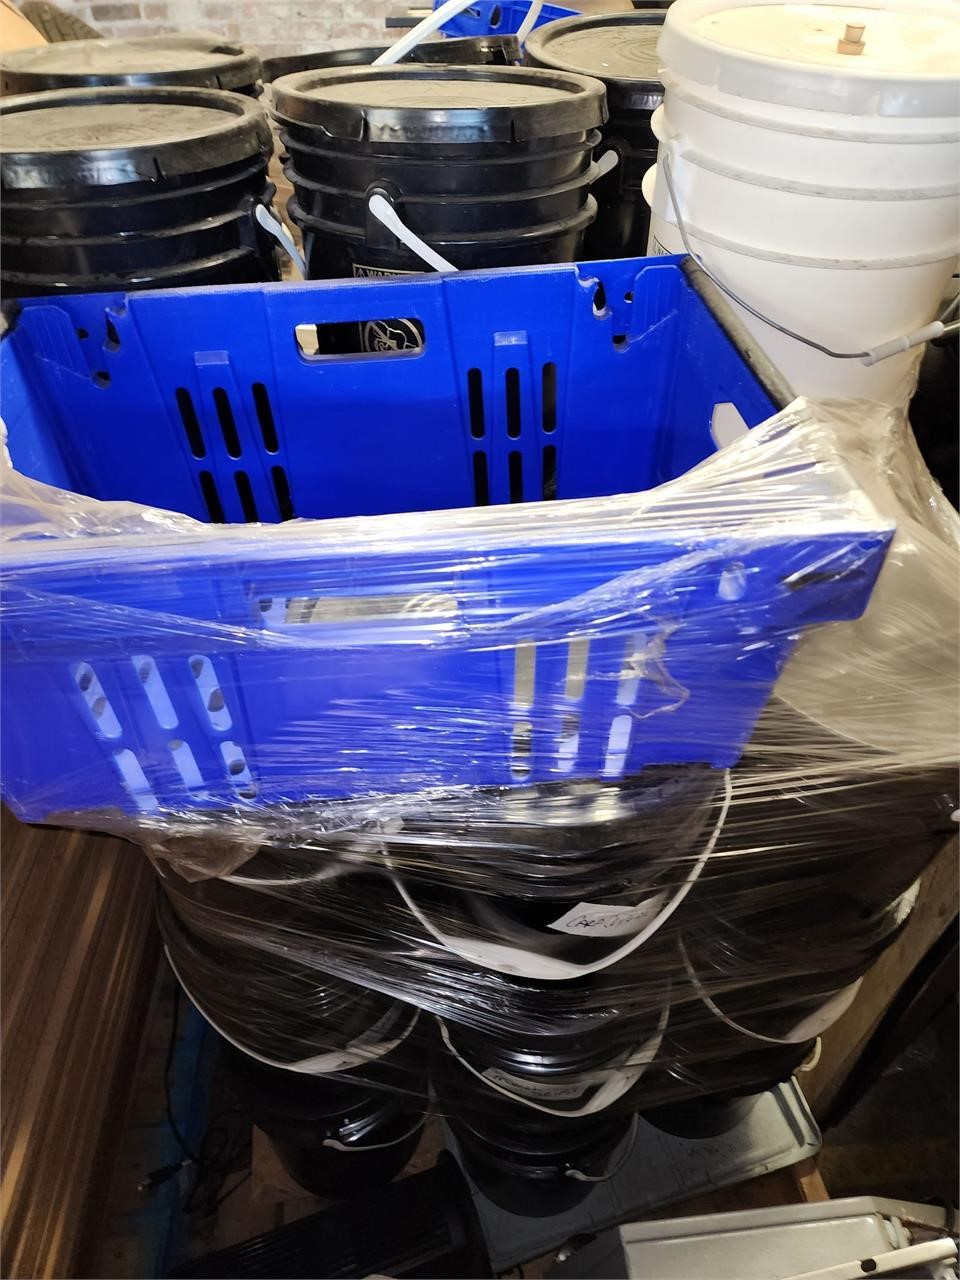 20 qty 5 gallon buckets of seed